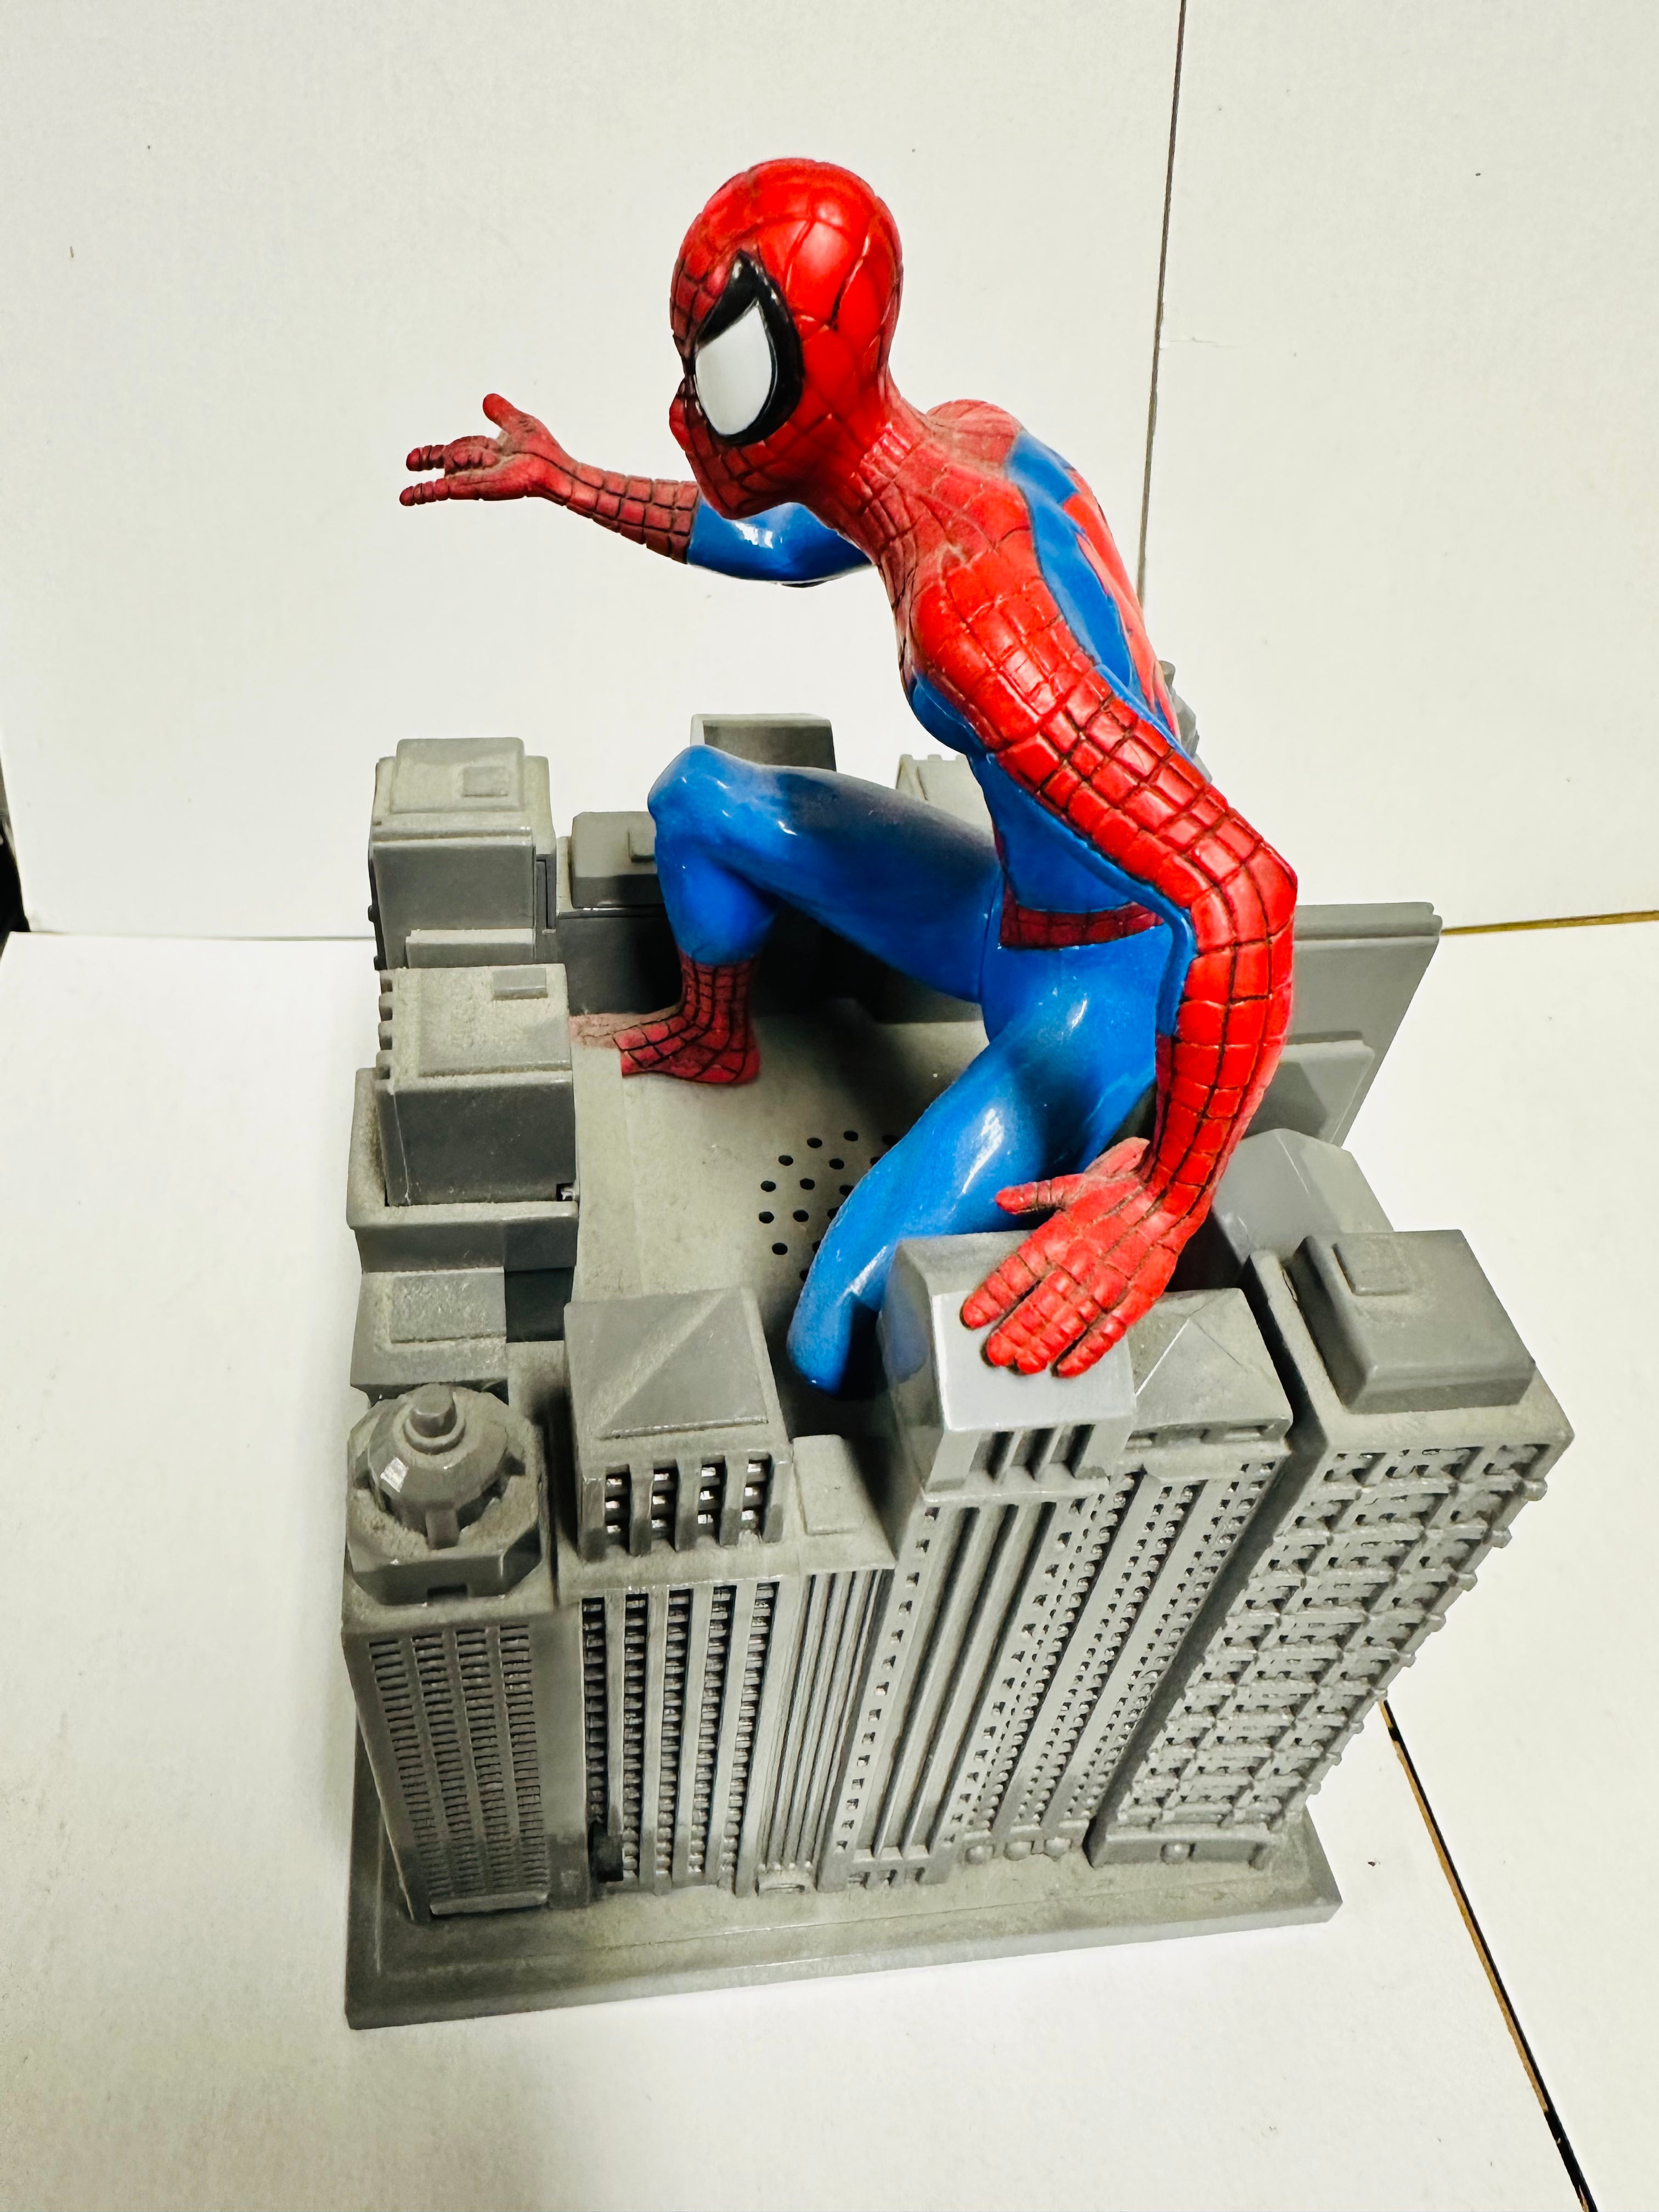 Spider-Man rare vintage statue with clock 1980s